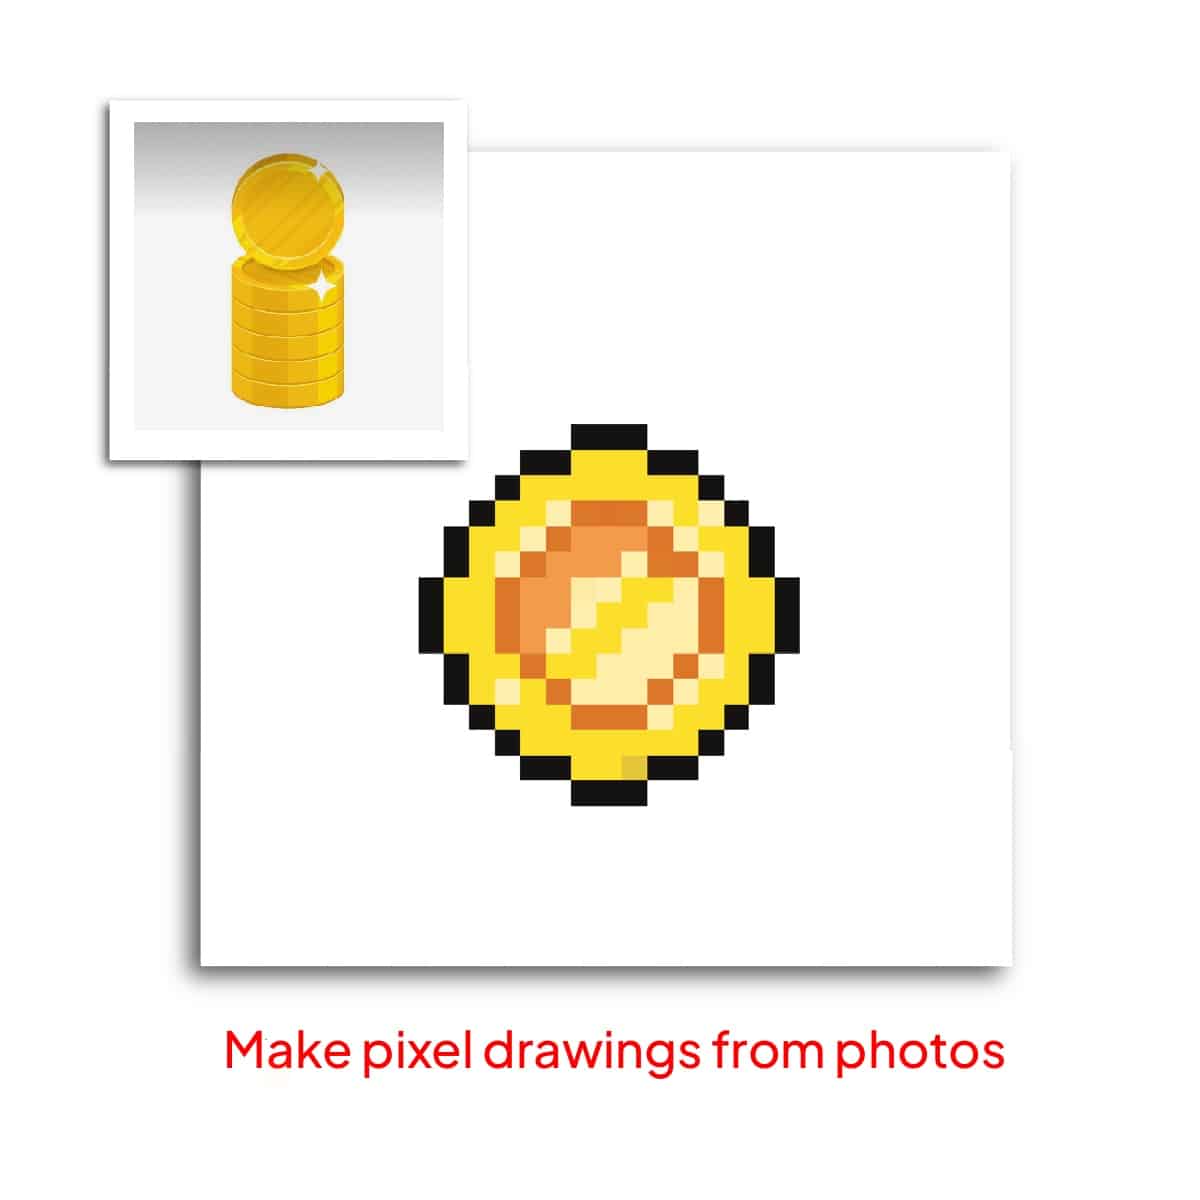 What To Draw As Pixel Art in Procreate?